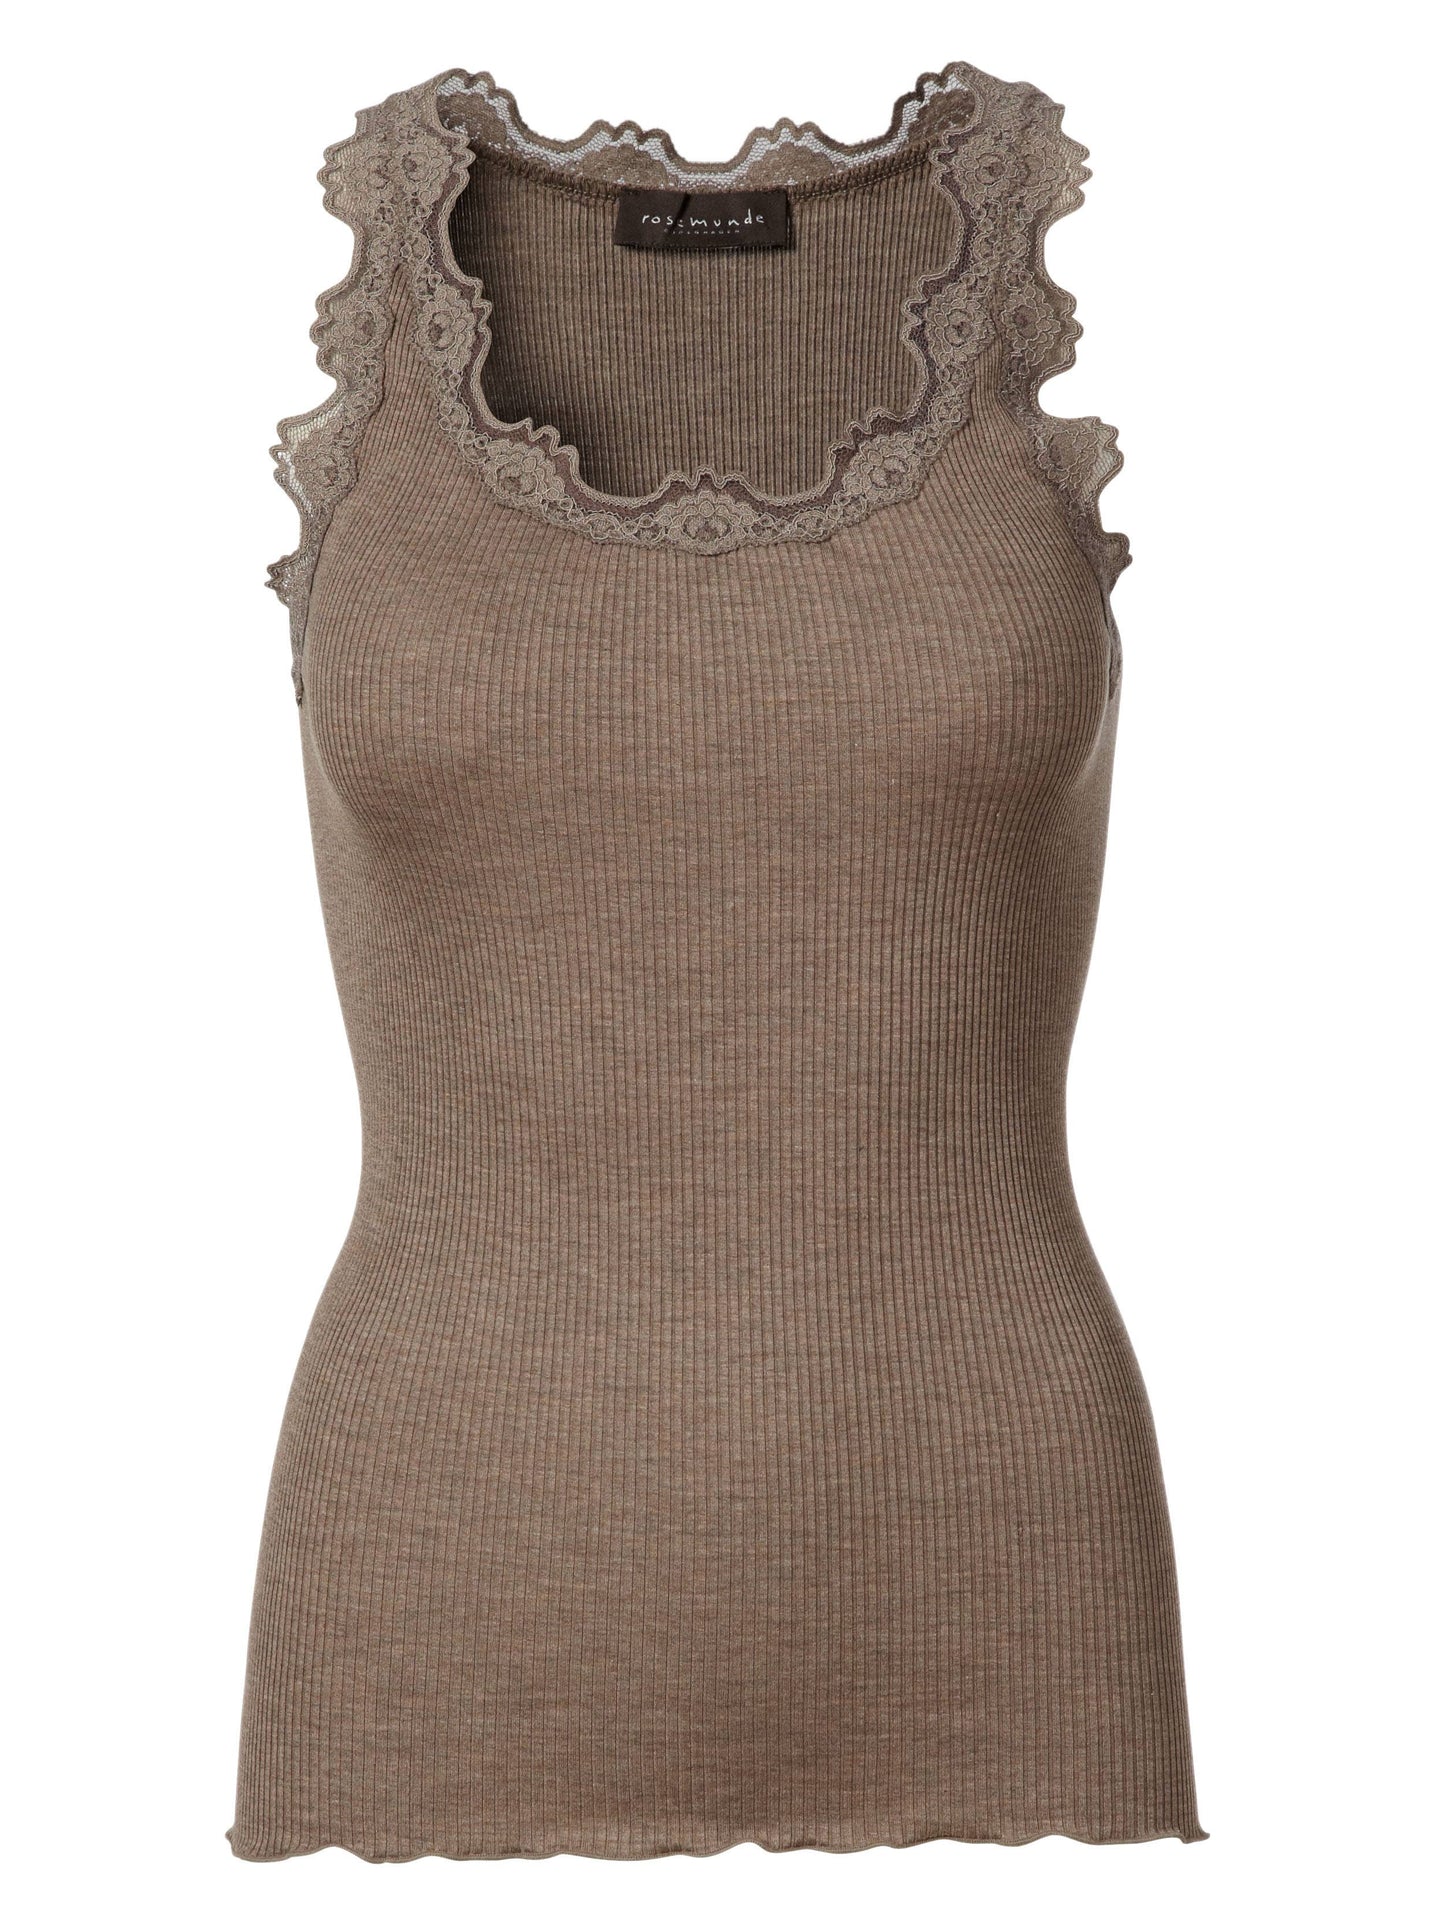 Iconic Silk Top With Lace - Rosemunde